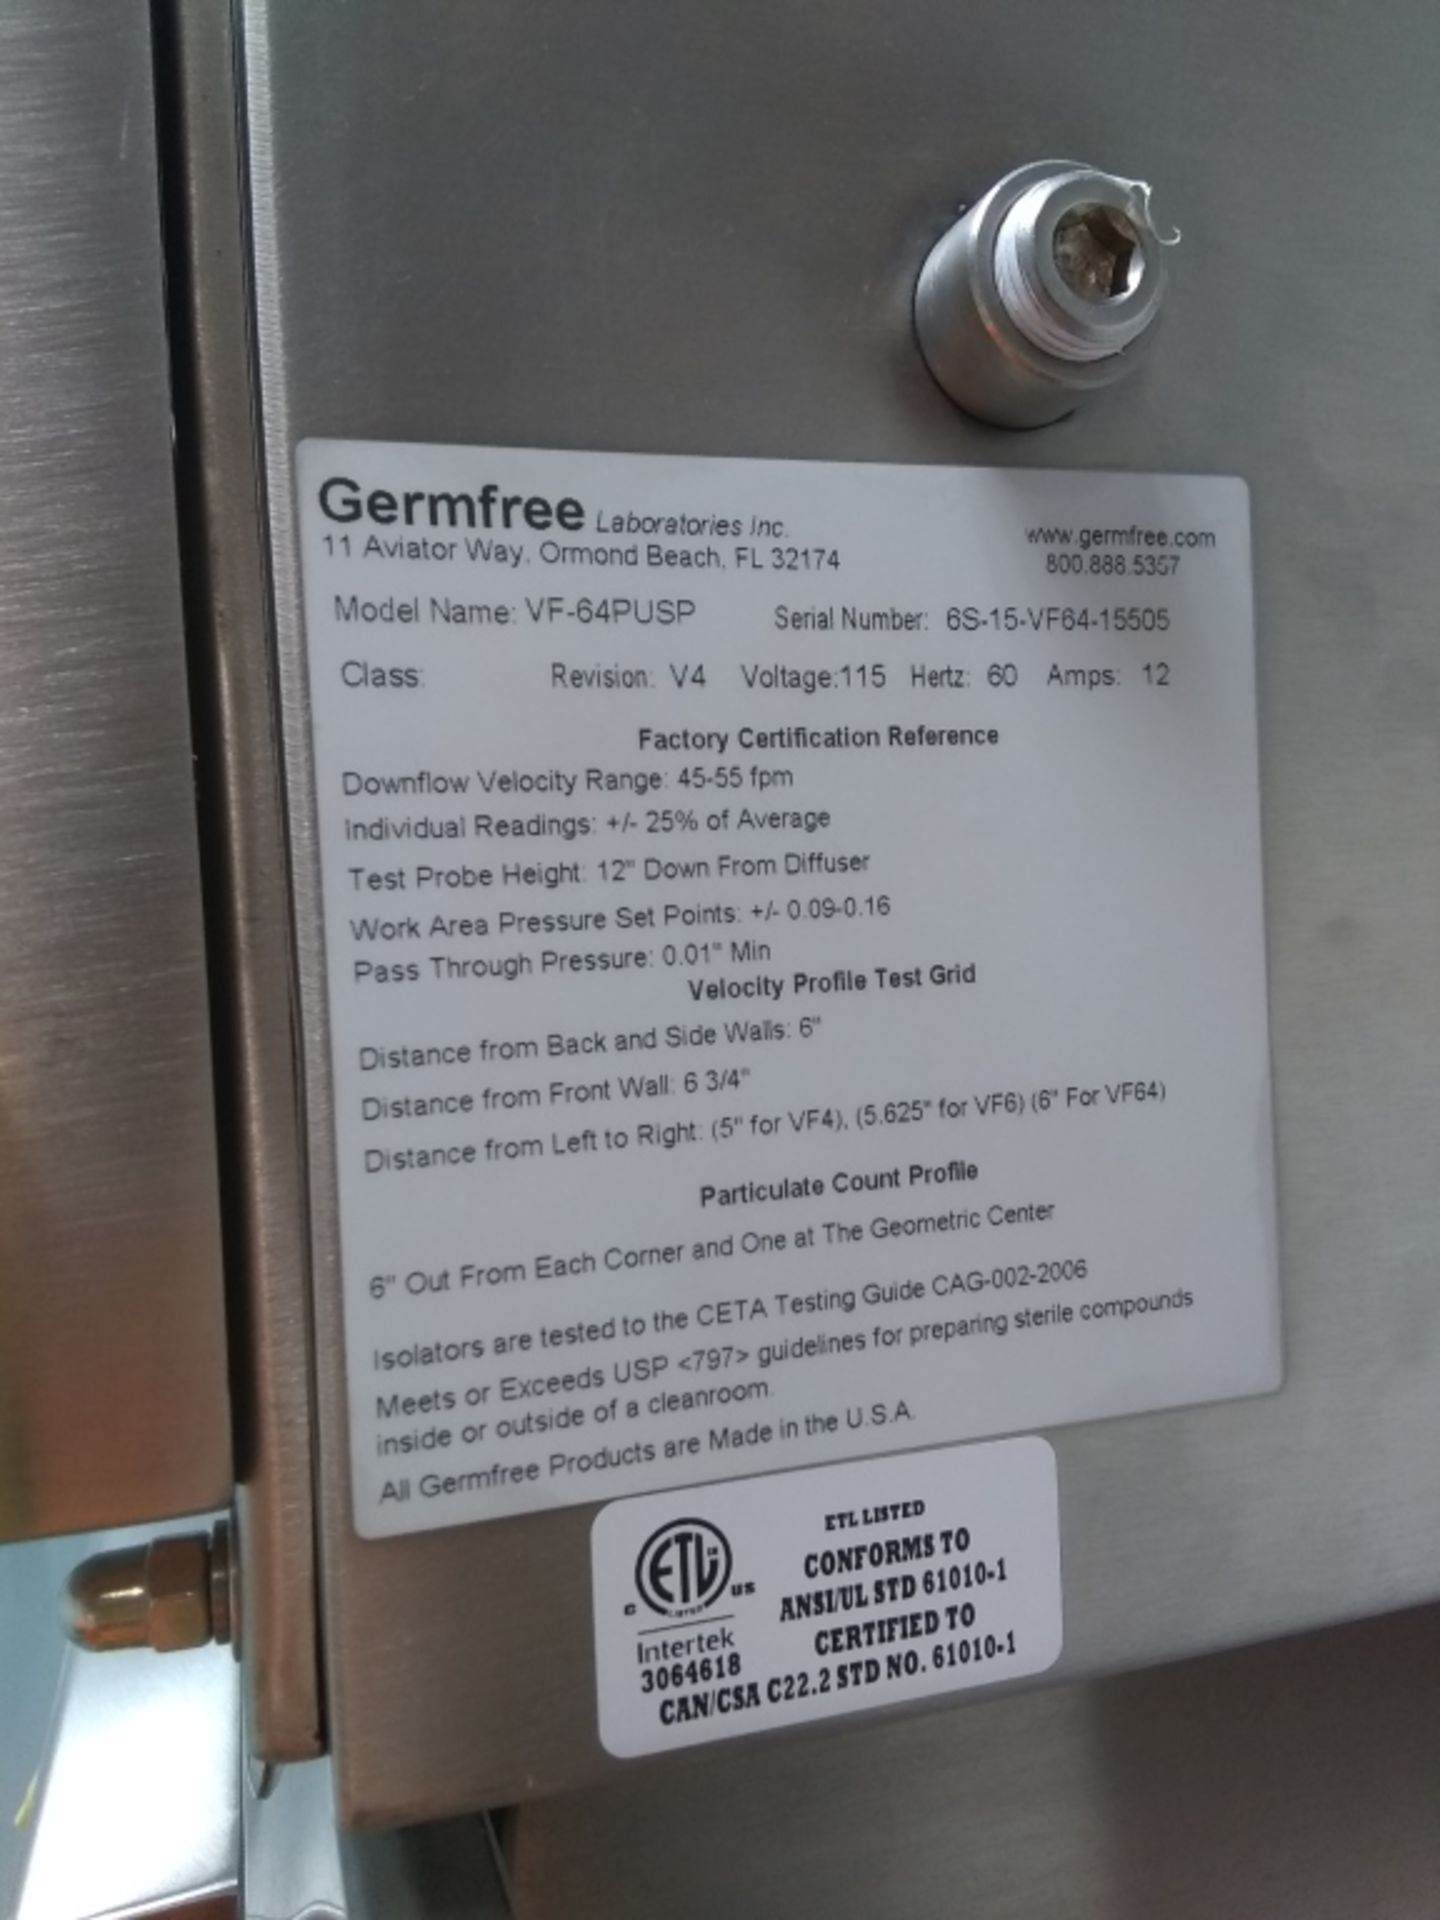 Germfree Labs Stainless Steel Compounding Aseptic Isolator - Image 4 of 4